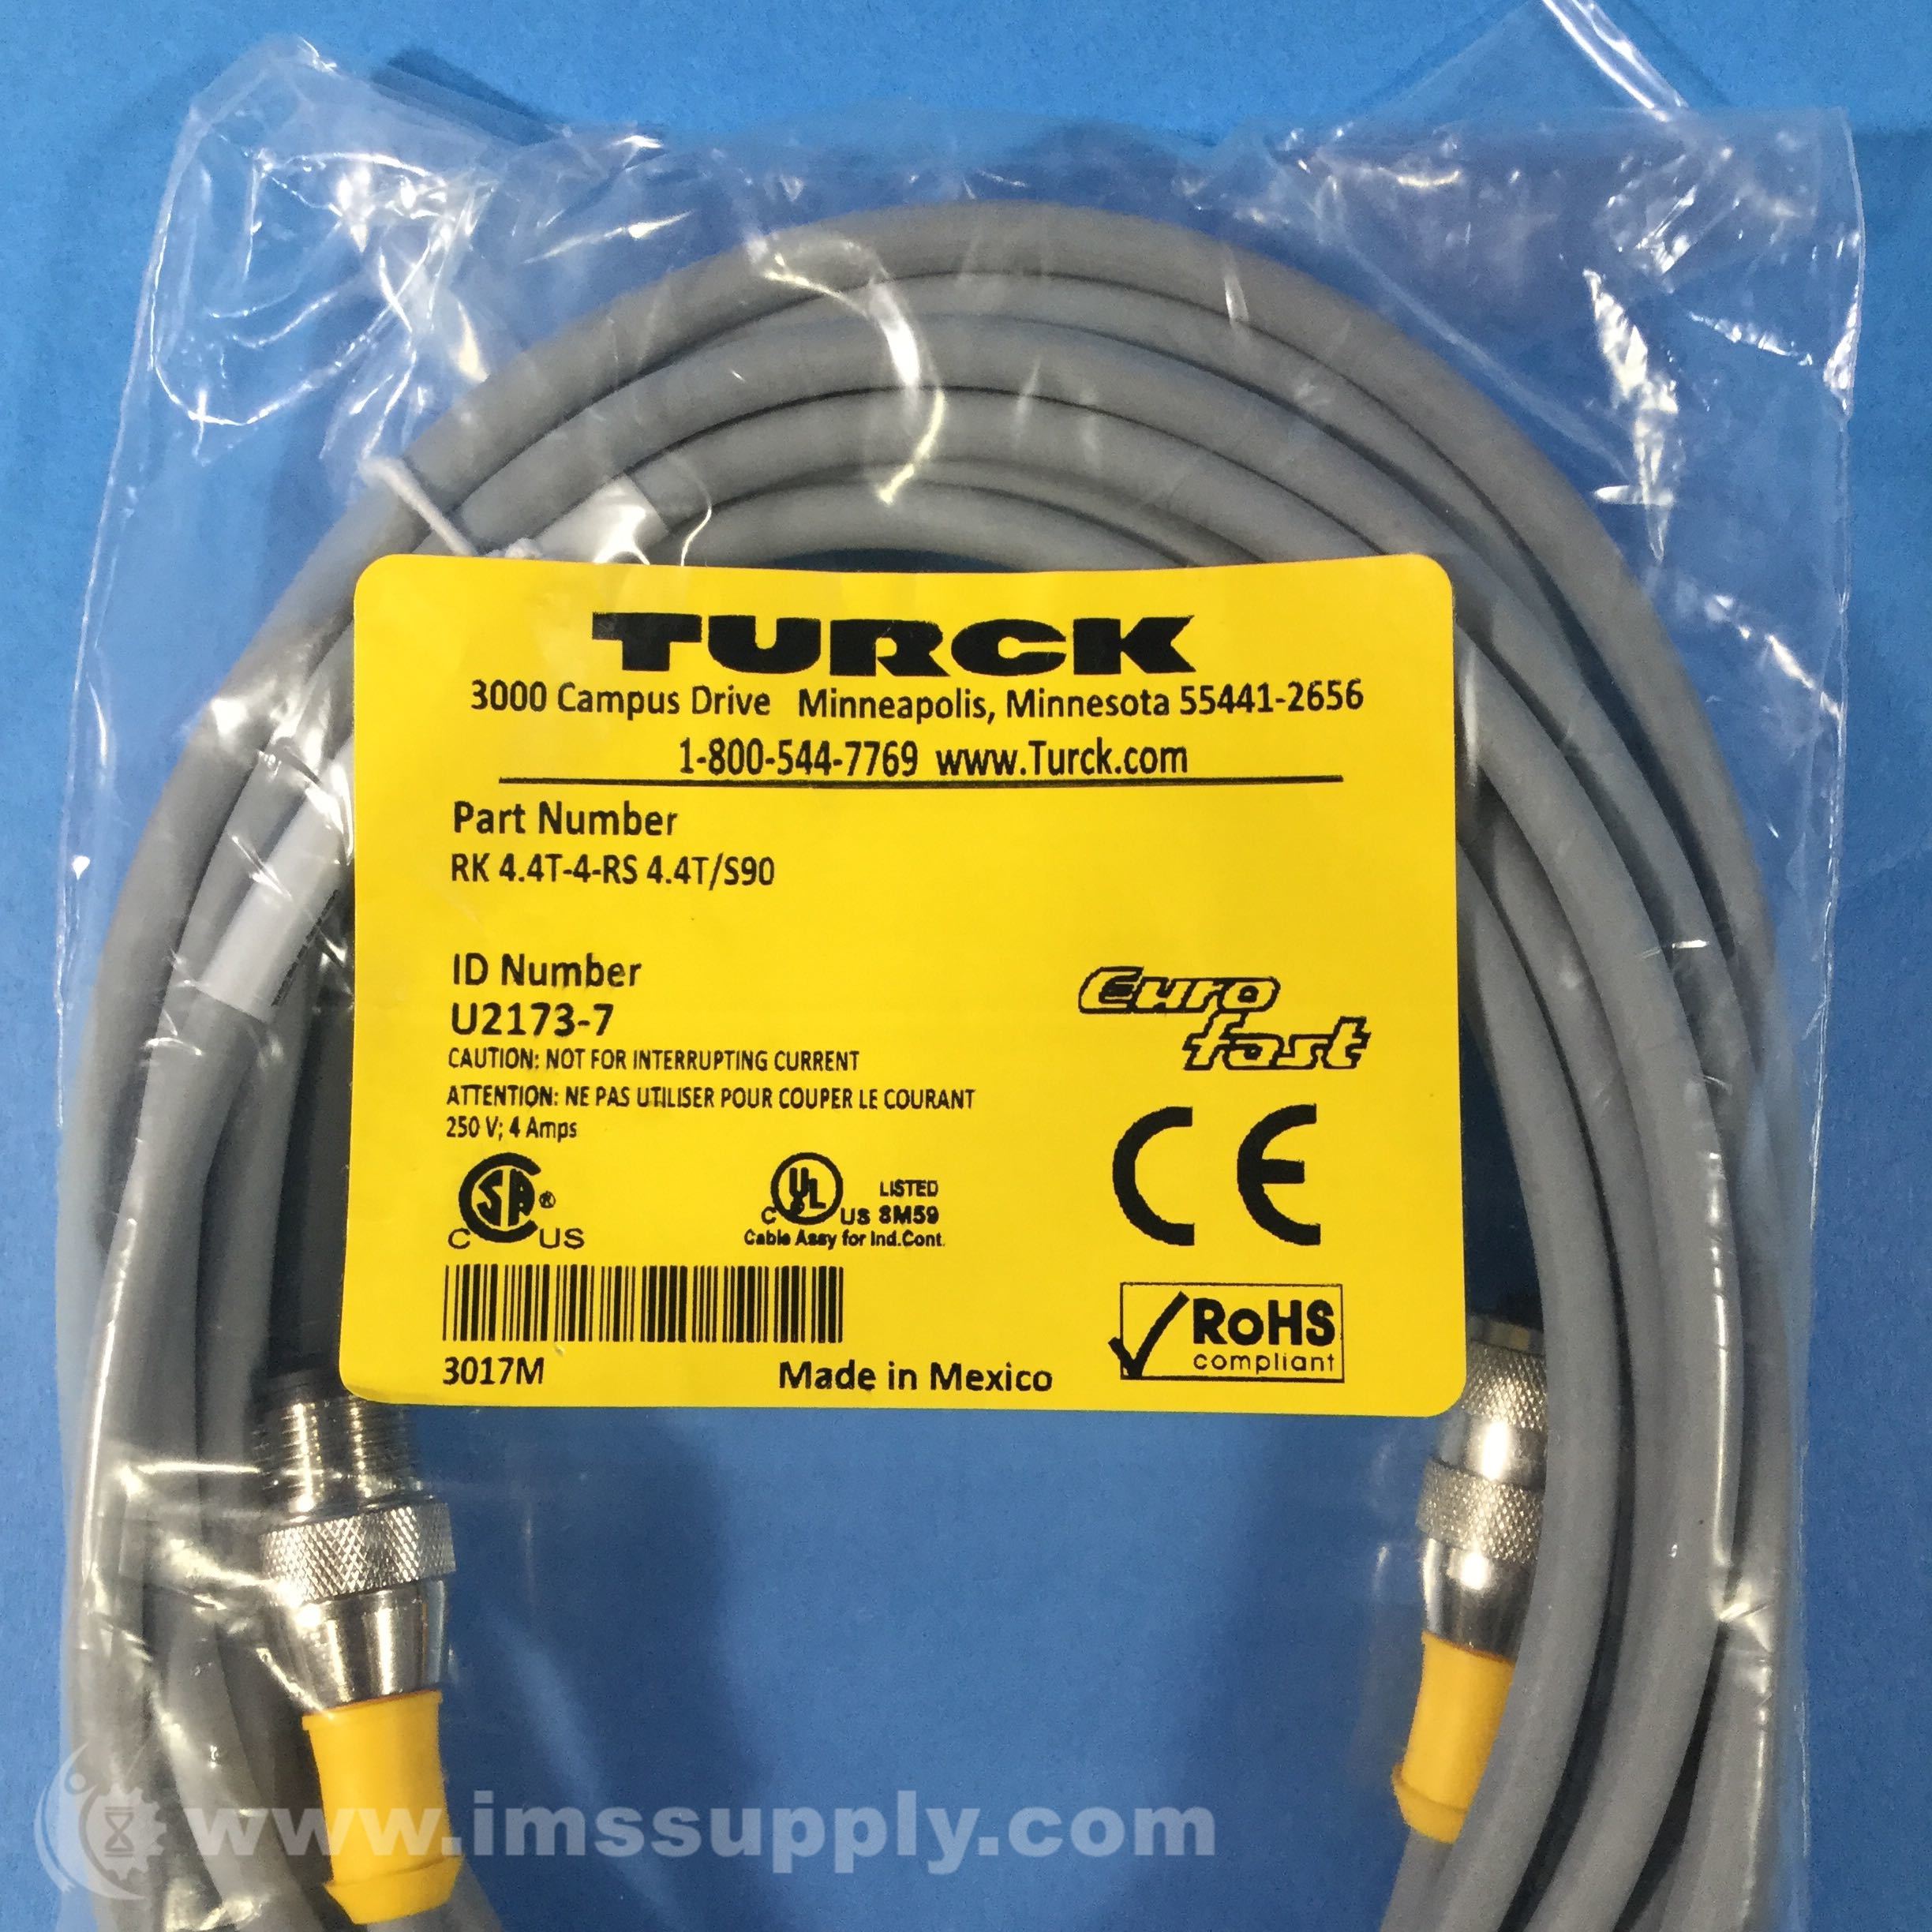 Details about   TURCK RKCV 4T-20/S623 CORDSET U5309-4 *** NEW IN FACTORY SEALED PACKAGE *** 